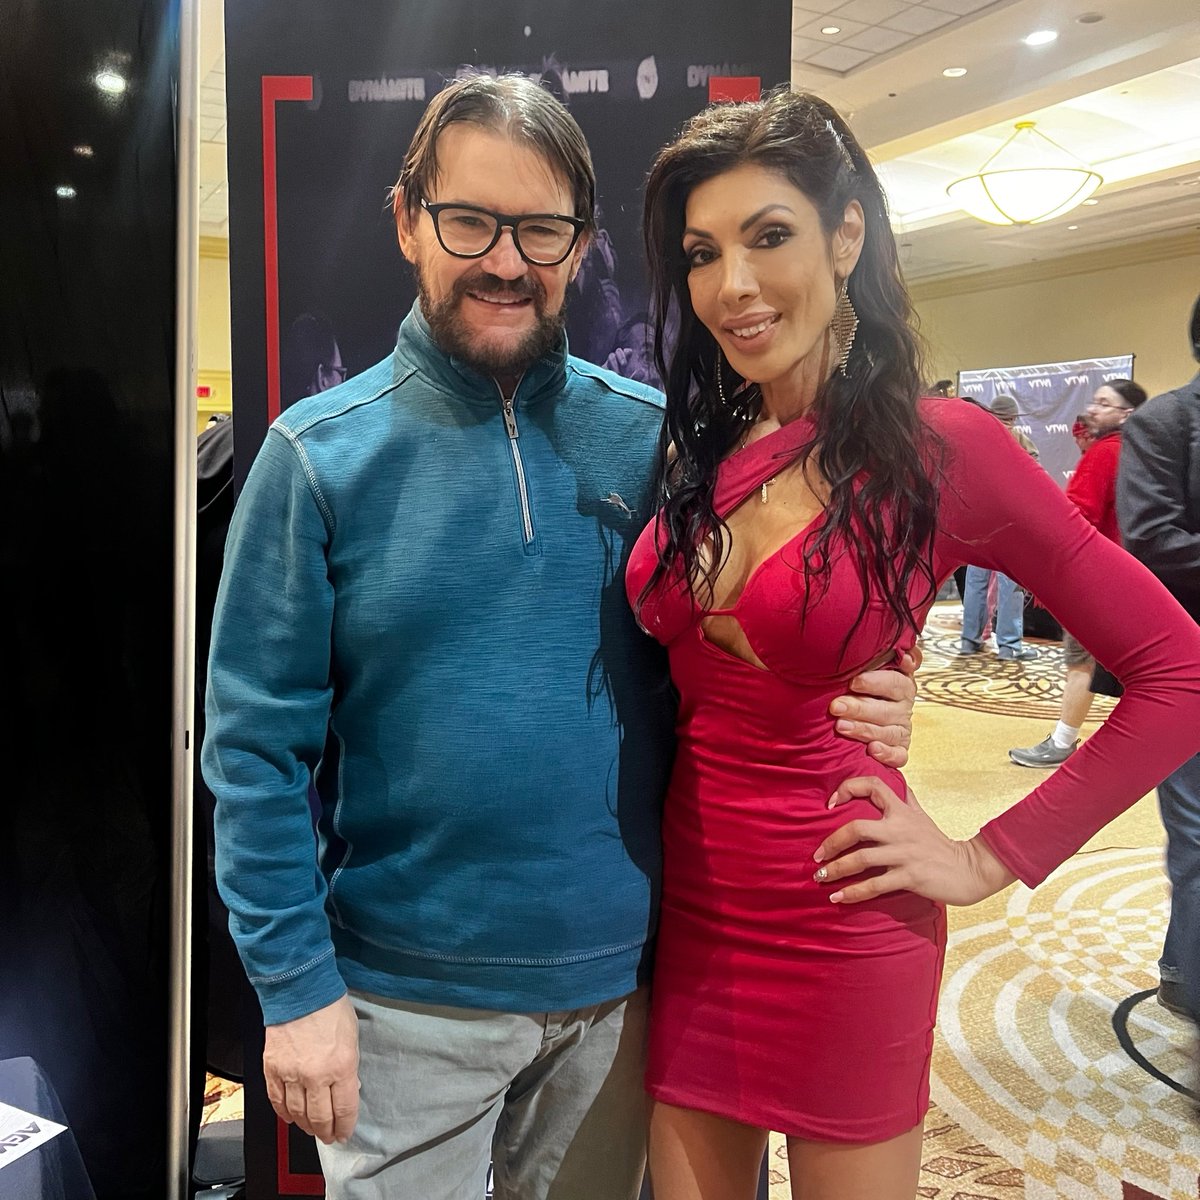 The charming @tonyschiavone24 ! Wonderful to meet the best voice in #prowrestling ! @AEW @wrestlecon #philly #WrestleMania #wrestlecon #tonyschiavone